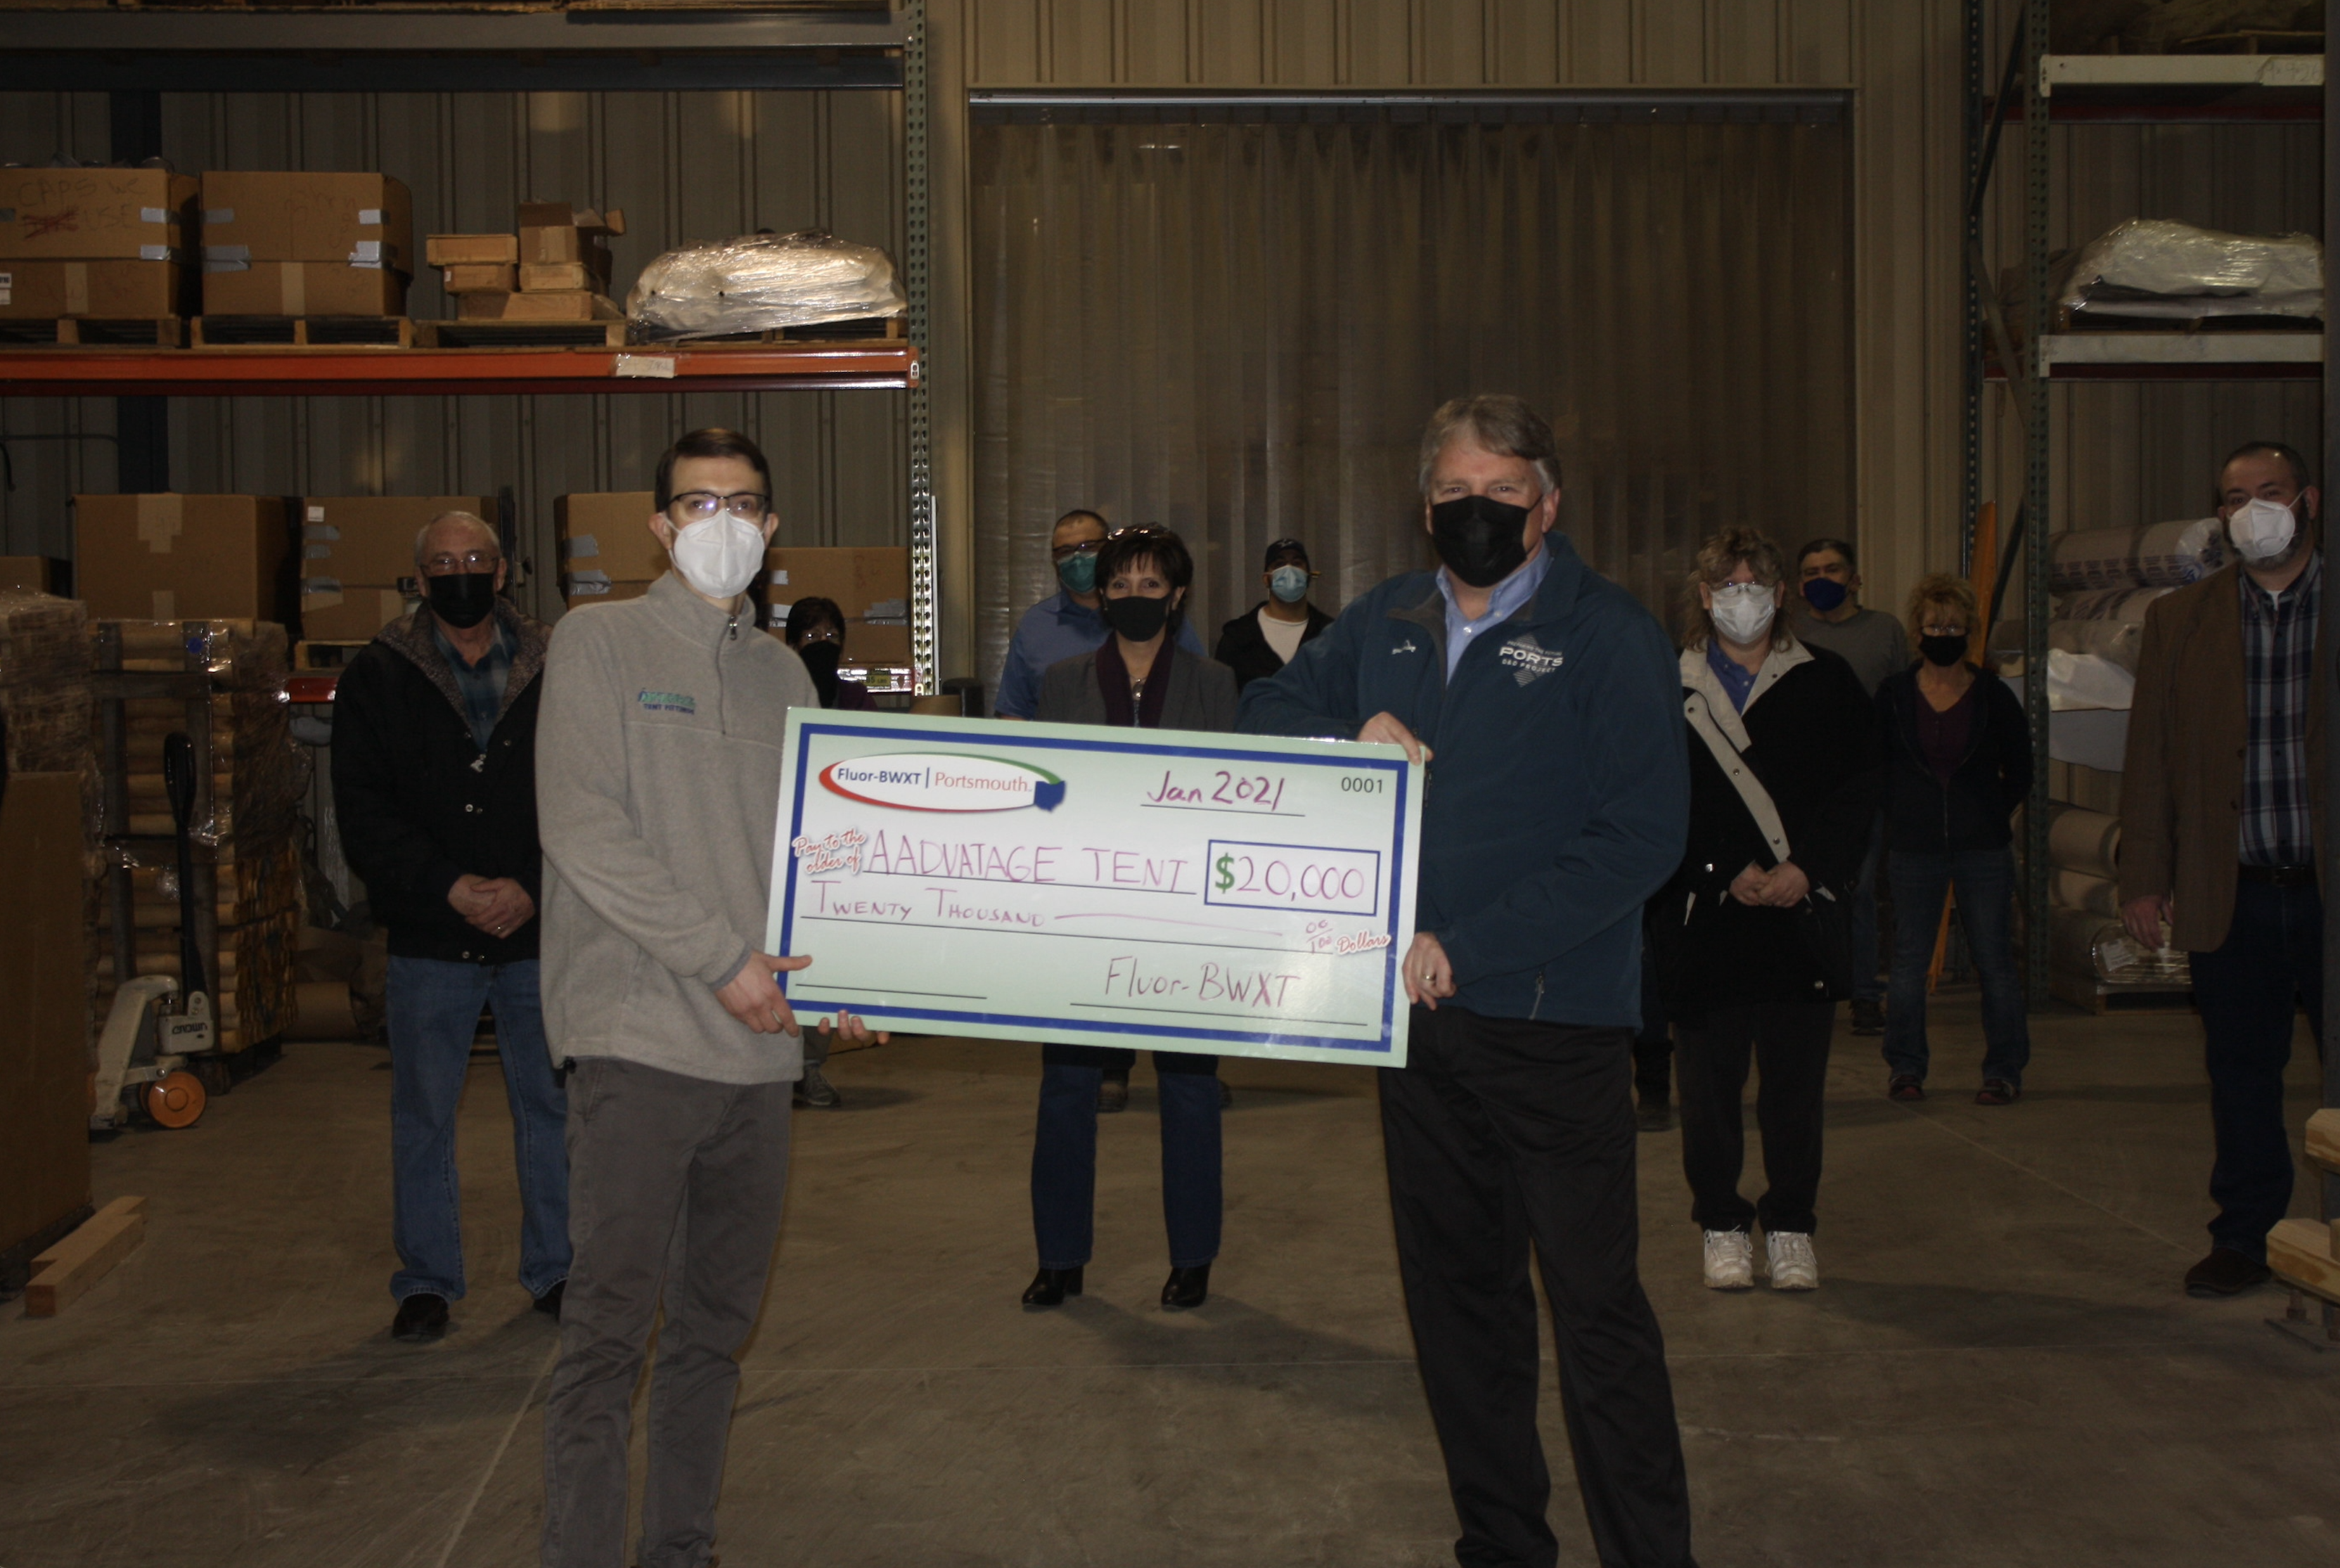 Featured image for “Ross County Tent Manufacturer Shifts to Making COVID PPE with $20,000 Grant from Fluor-BWXT (FBP)”